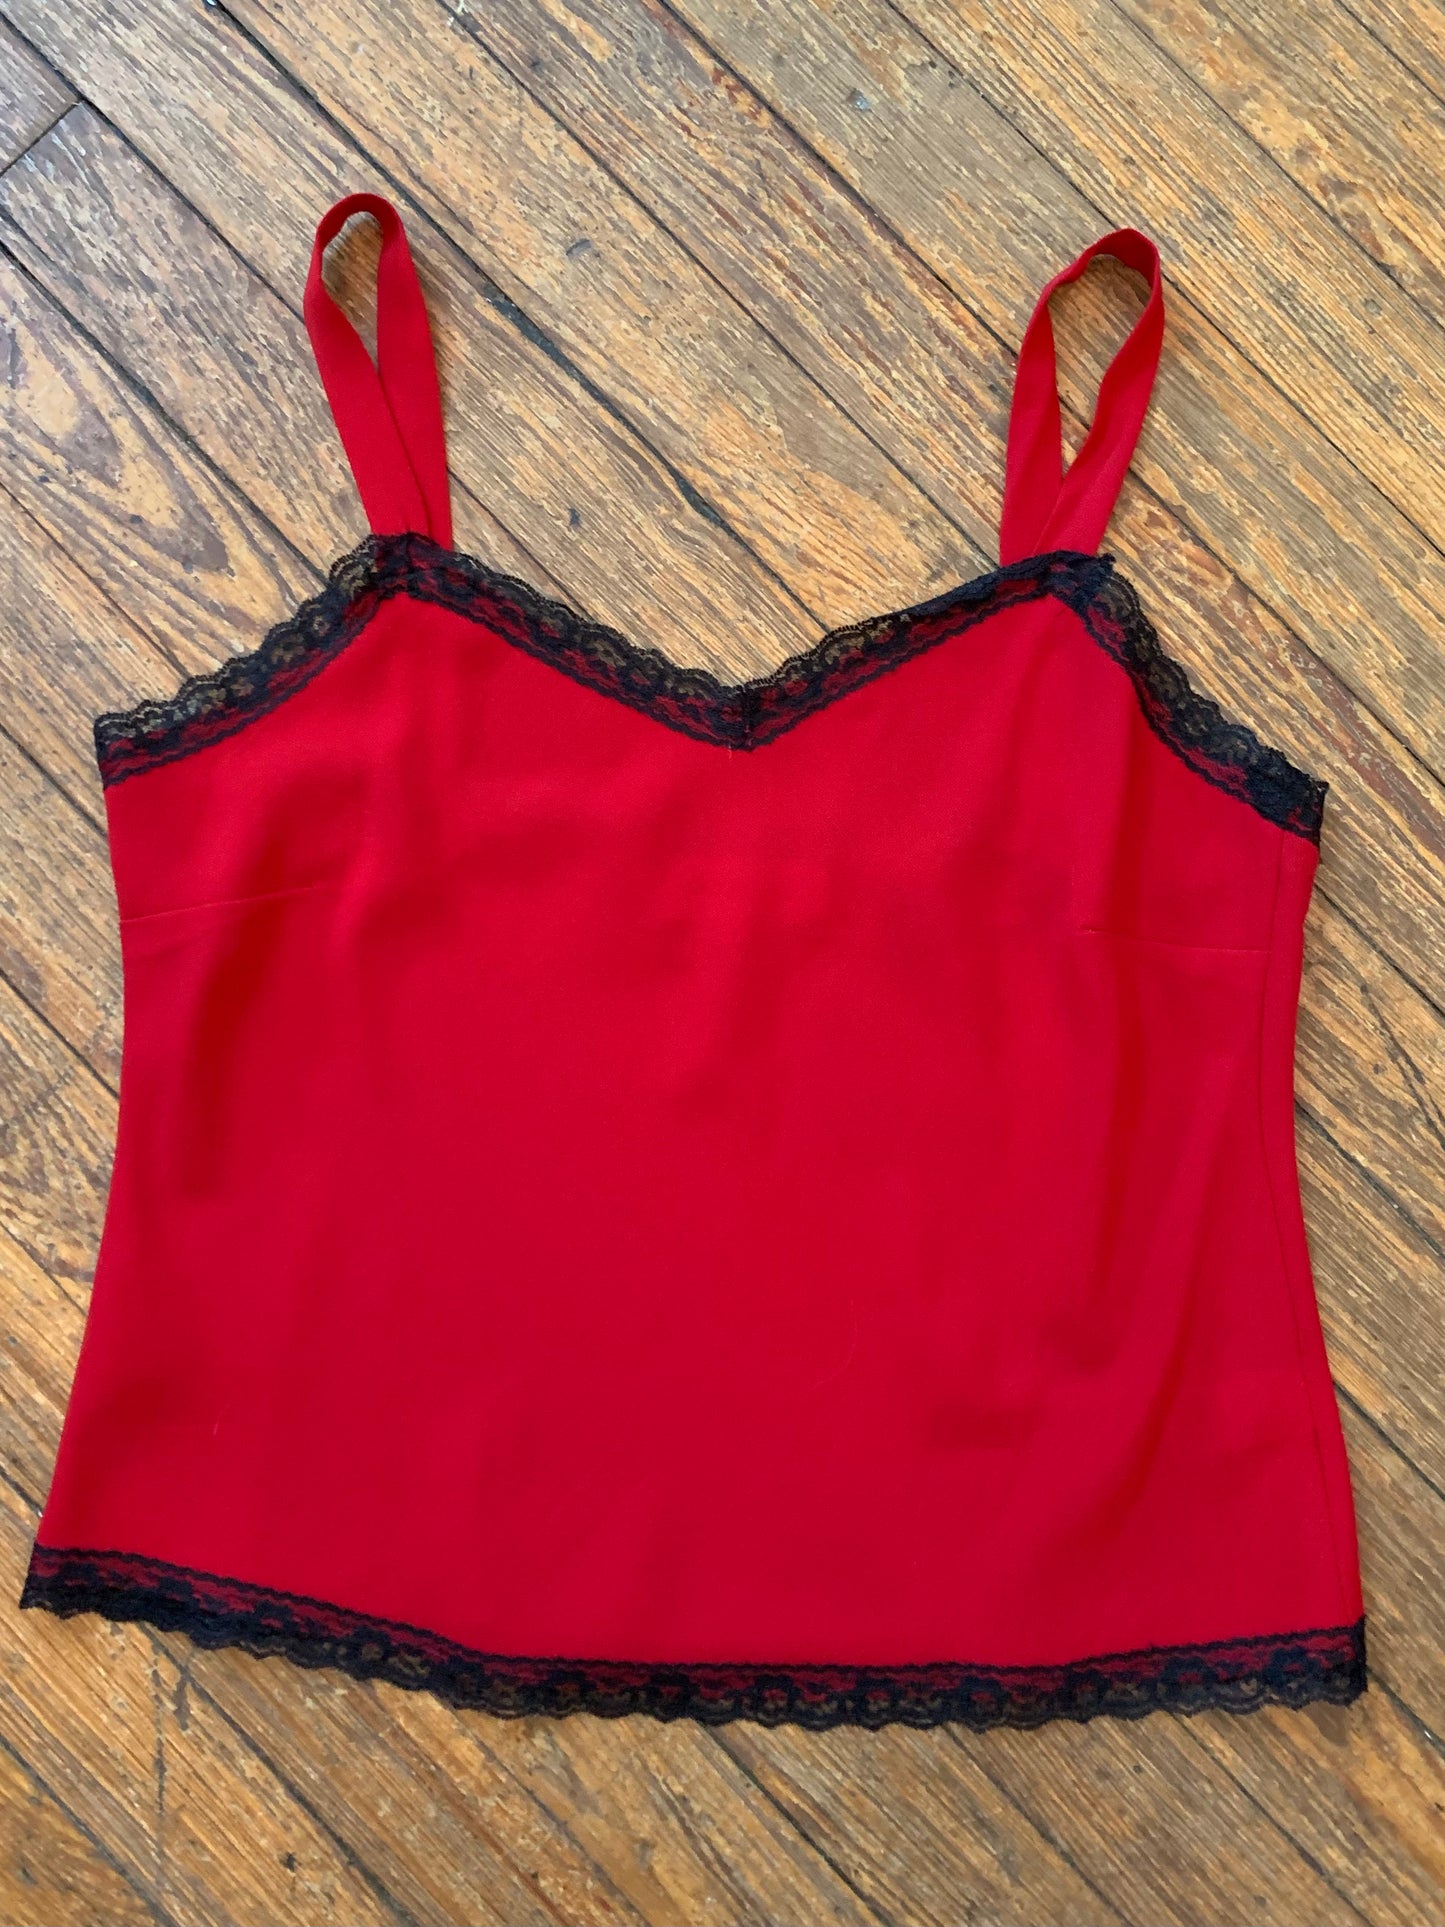 Red and Black Lace Trim Tank Top